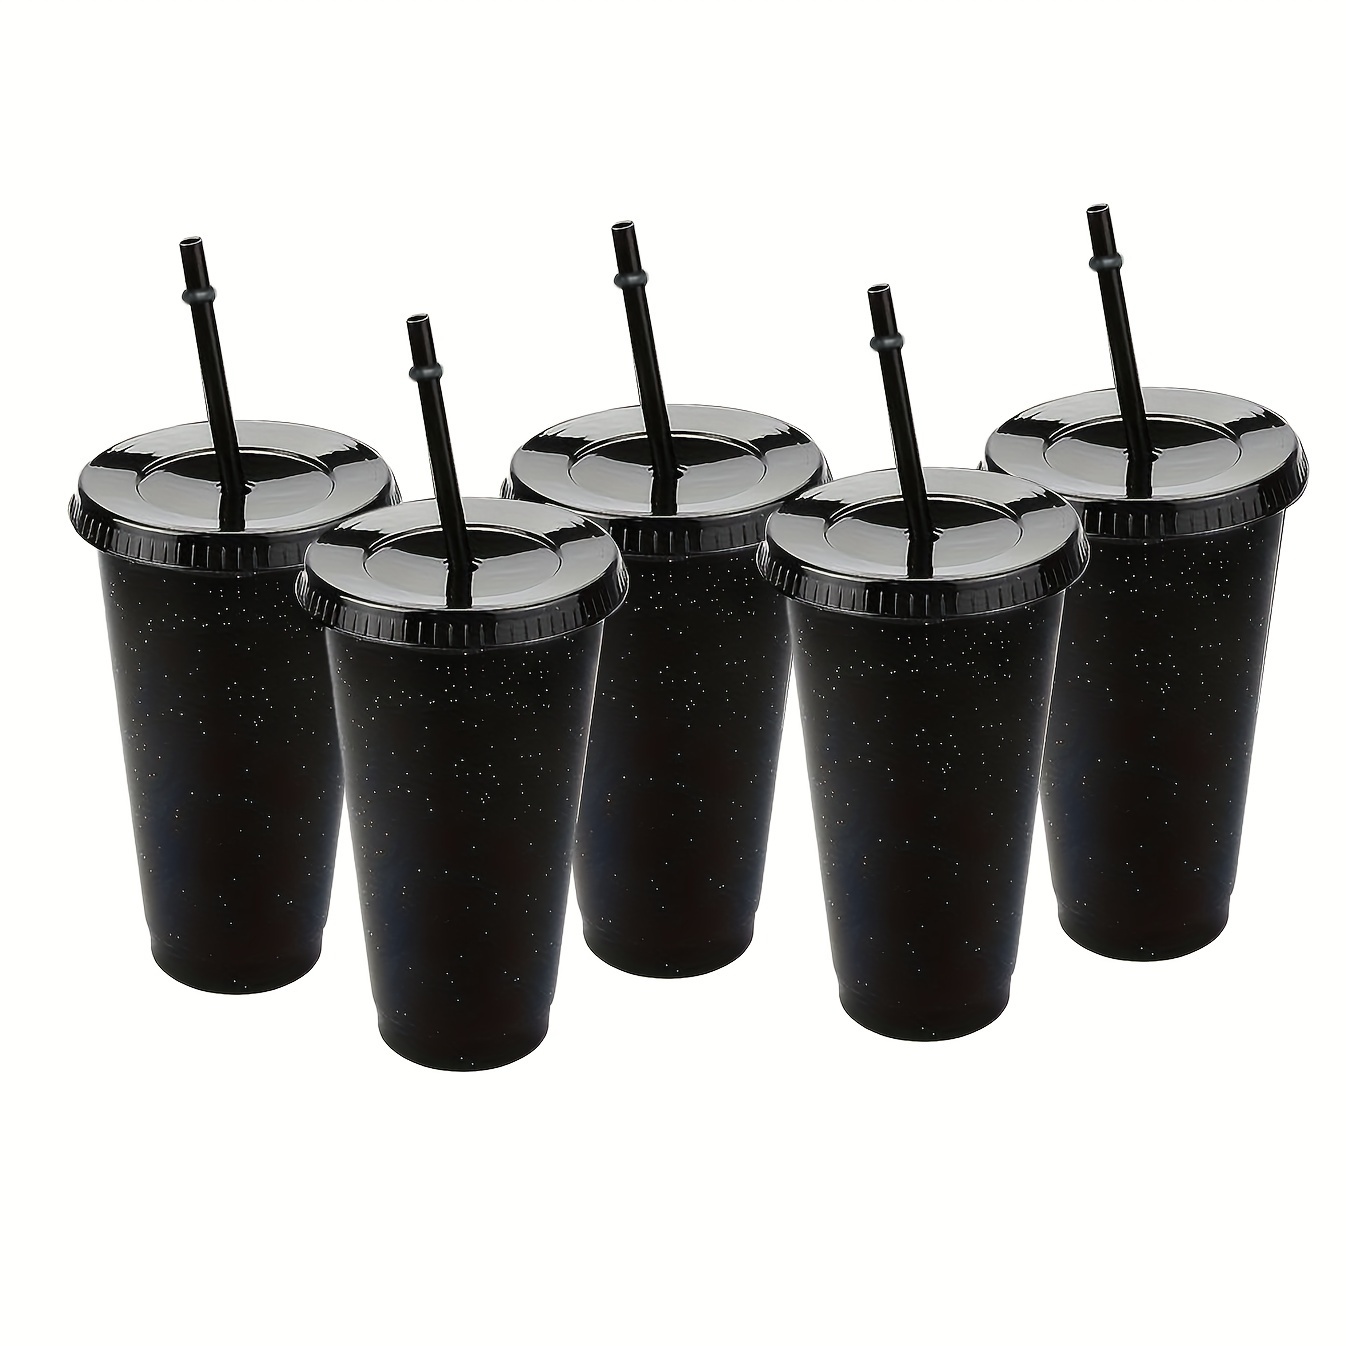 Reusable Plastic Cups With Straw And Lids, Black Durable Water Cup